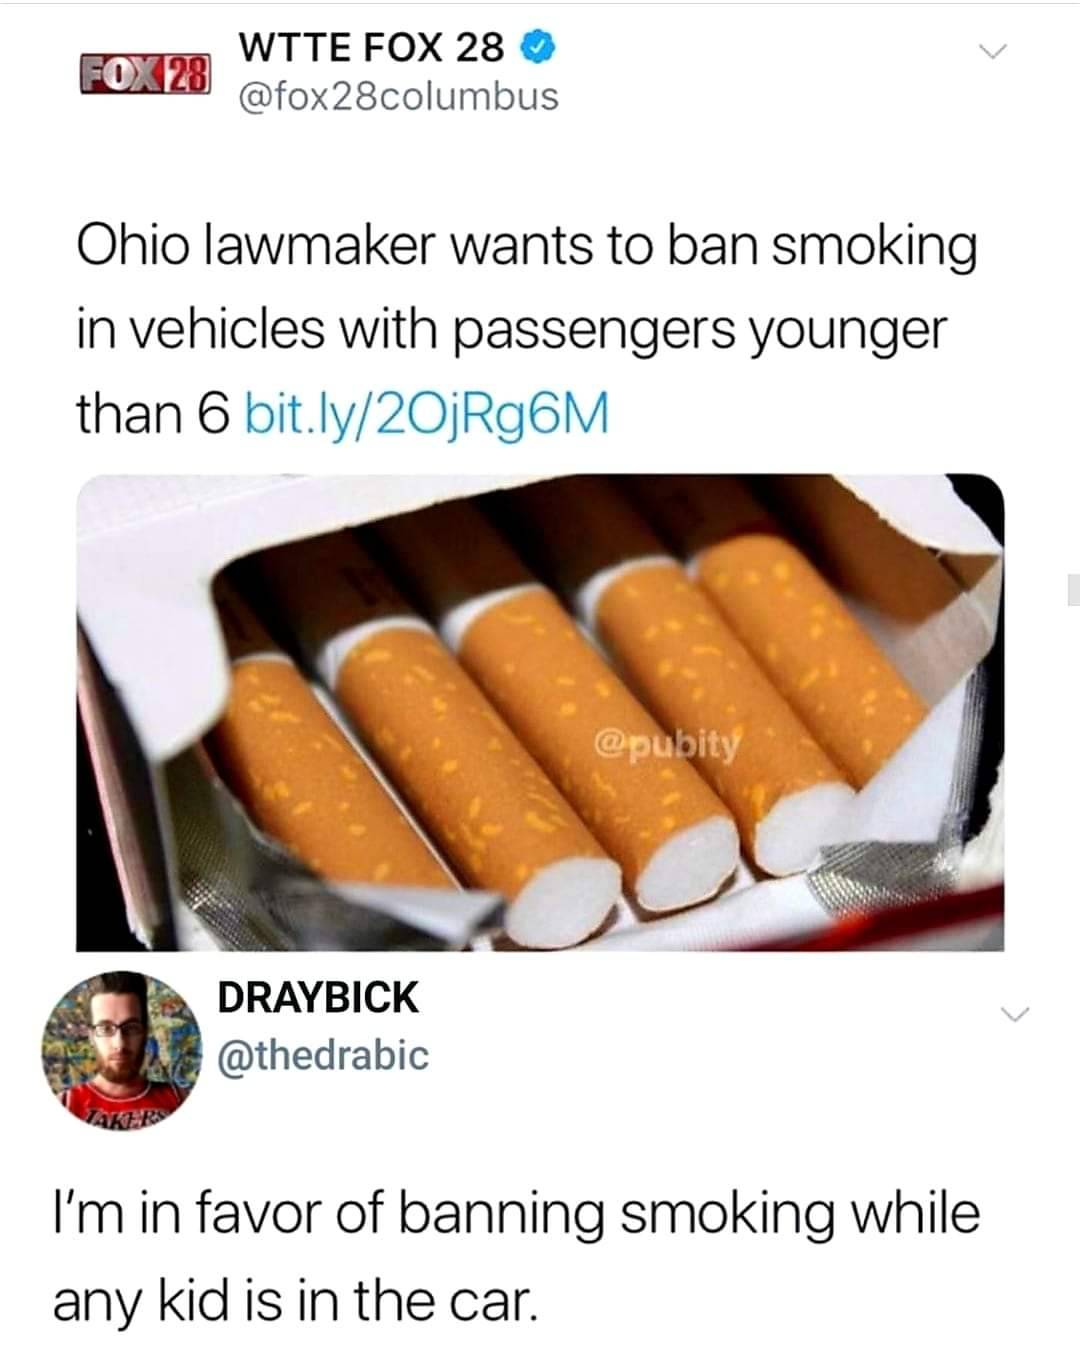 ro-zden:theconcealedweapon:If they’re too young to choose to smoke, then they’re too young to be forced to deal with someone else choosing to smoke. Exactly. Why stop with “under 6”? I’d say “under 18”, and anyone